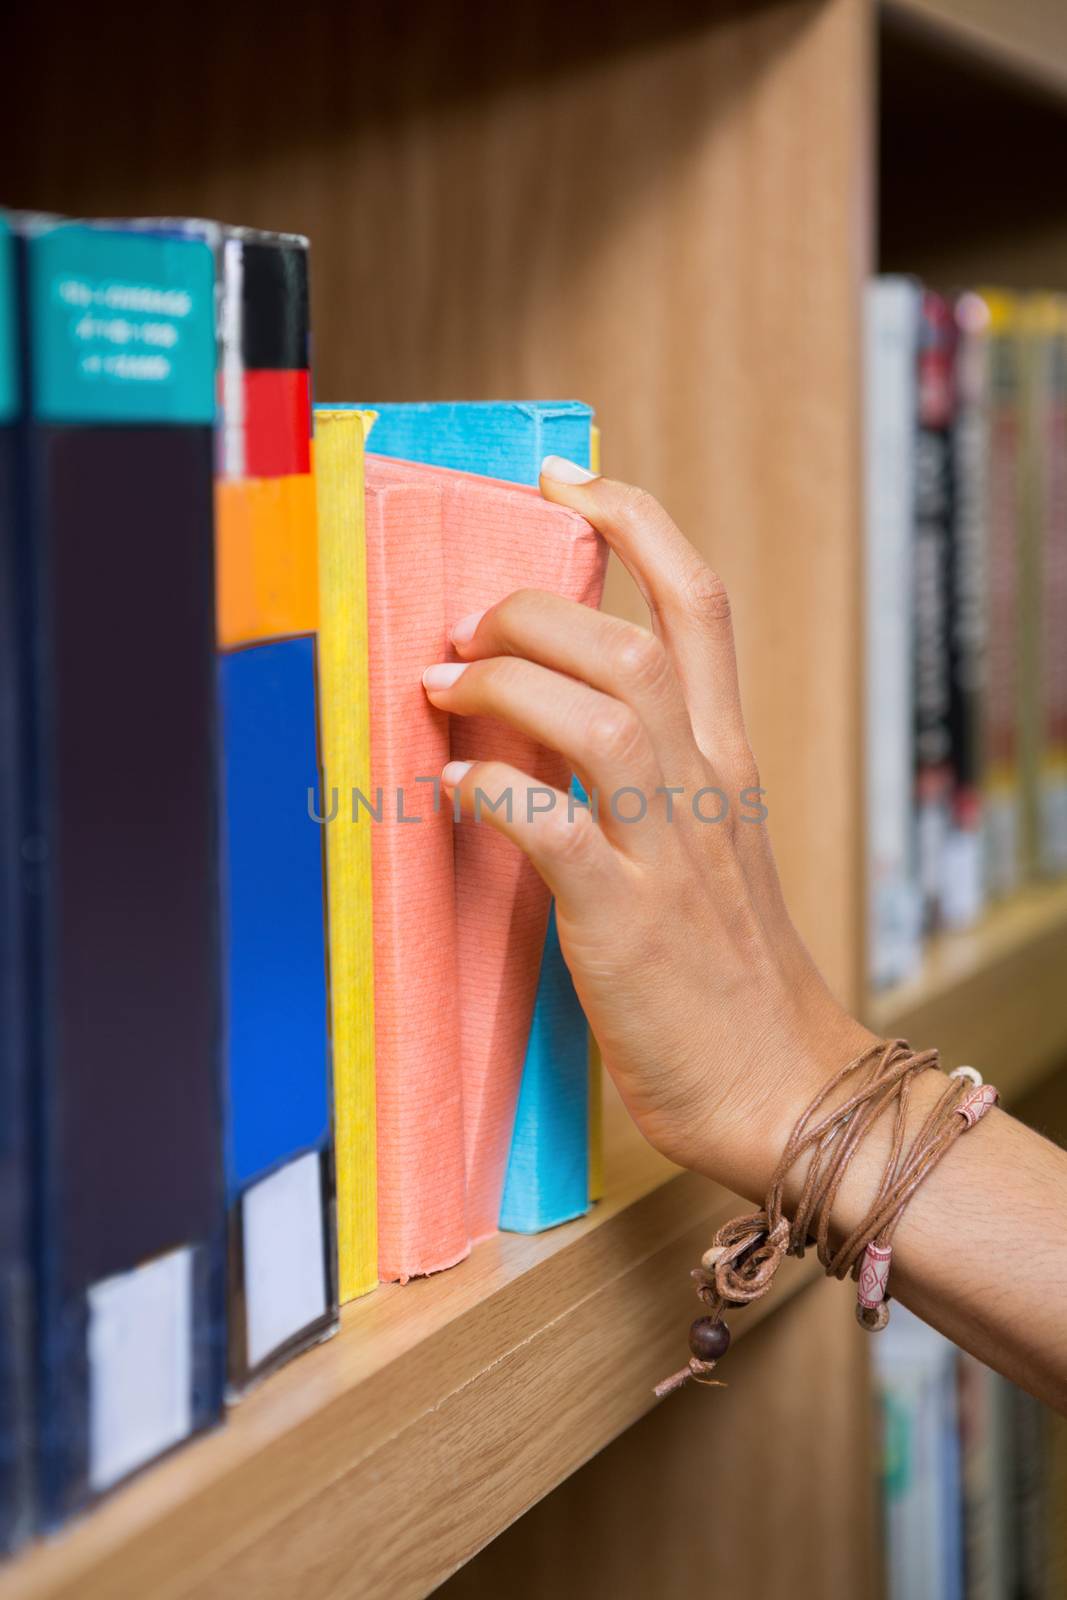 Student picking a book from shelf in library at the university